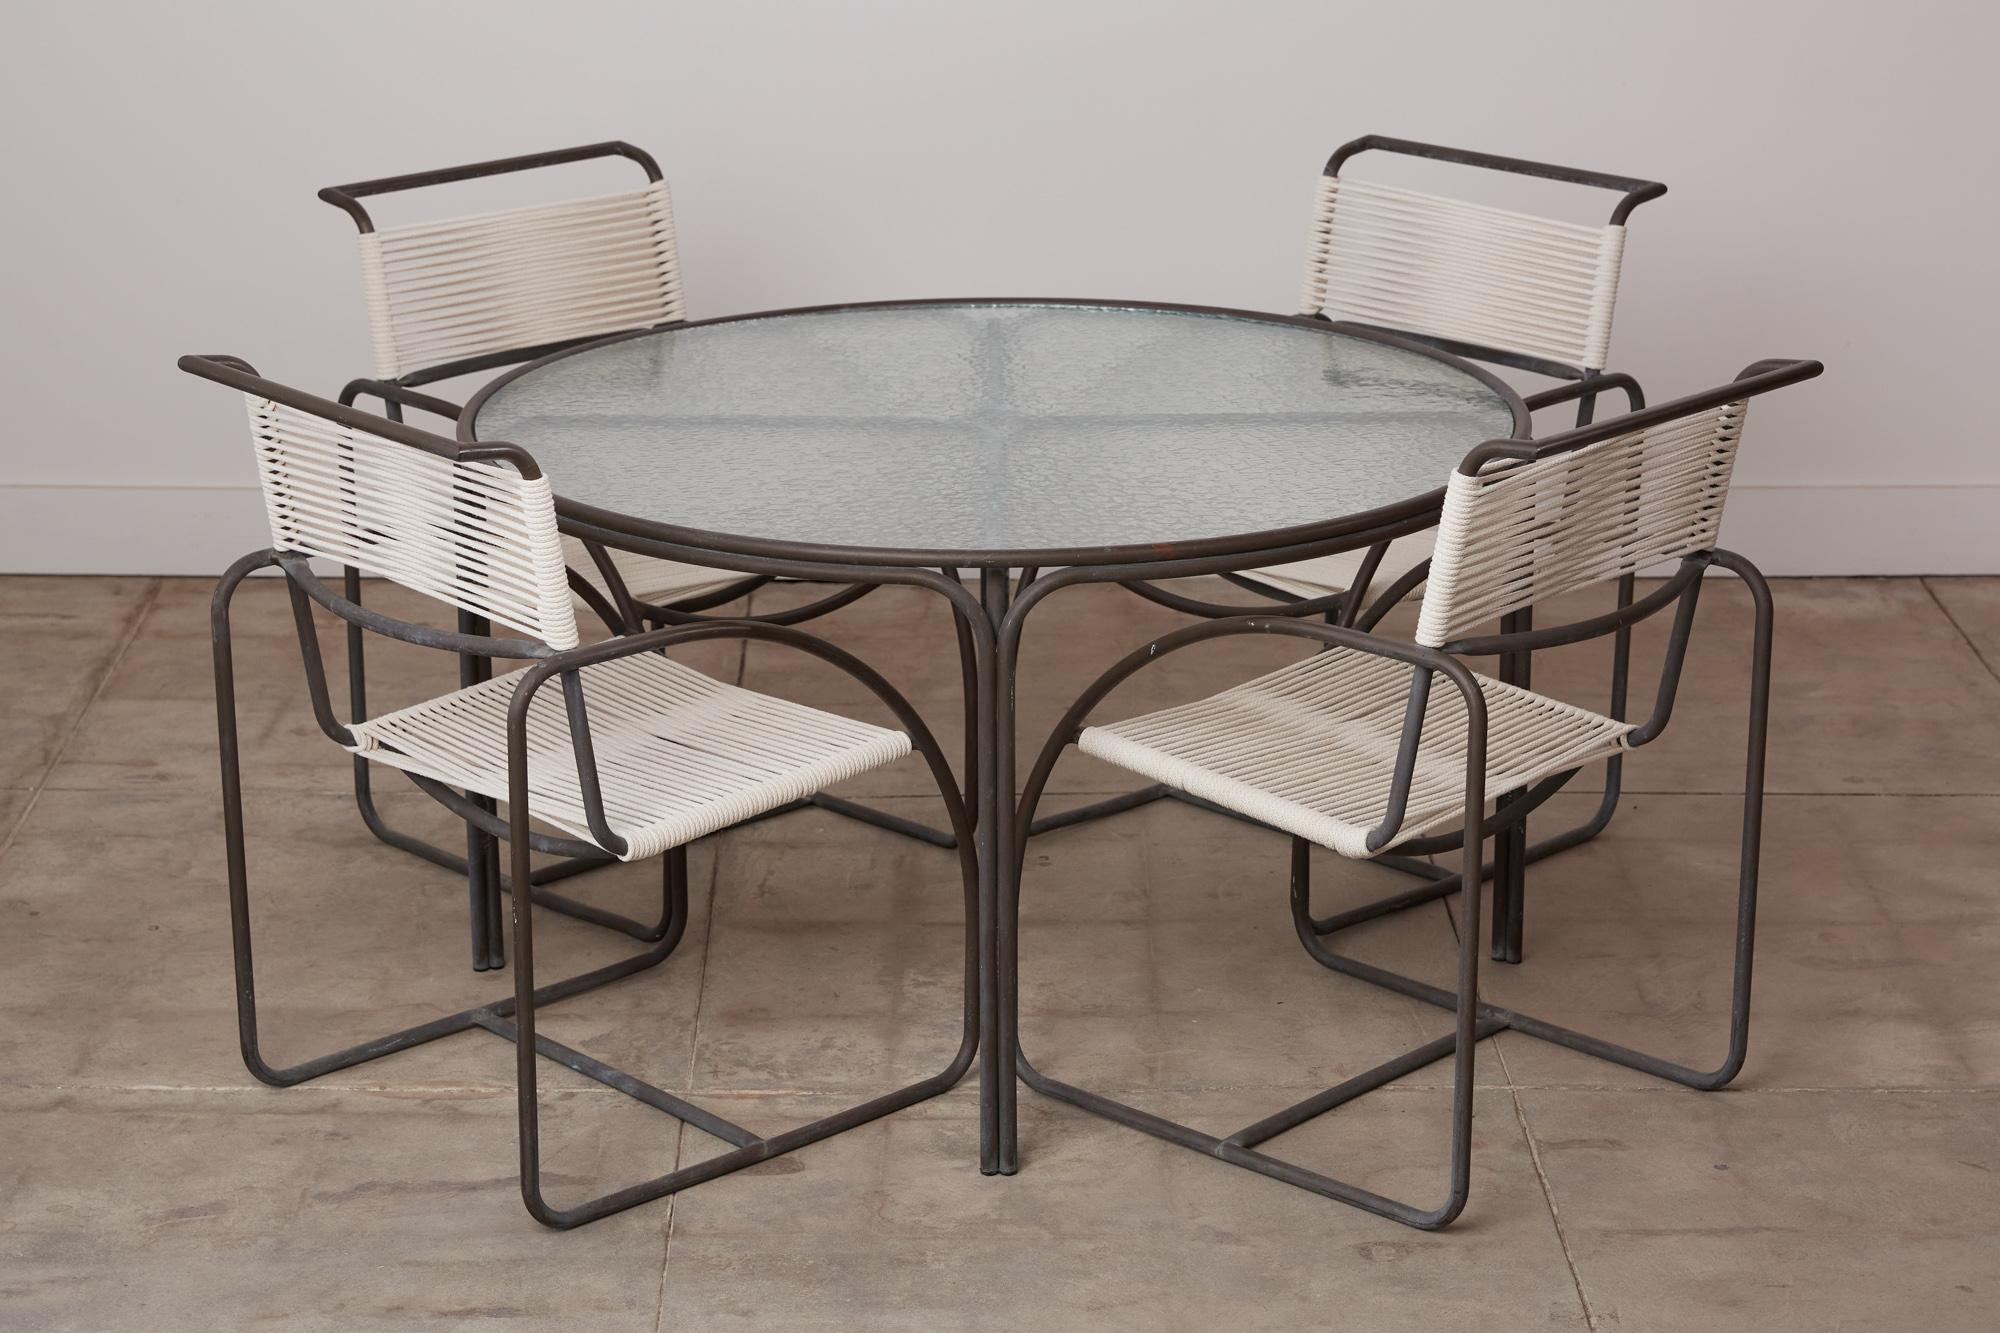 Patio dining set by Kipp Stewart for Terra of California, USA, c.1970s. This set from the 